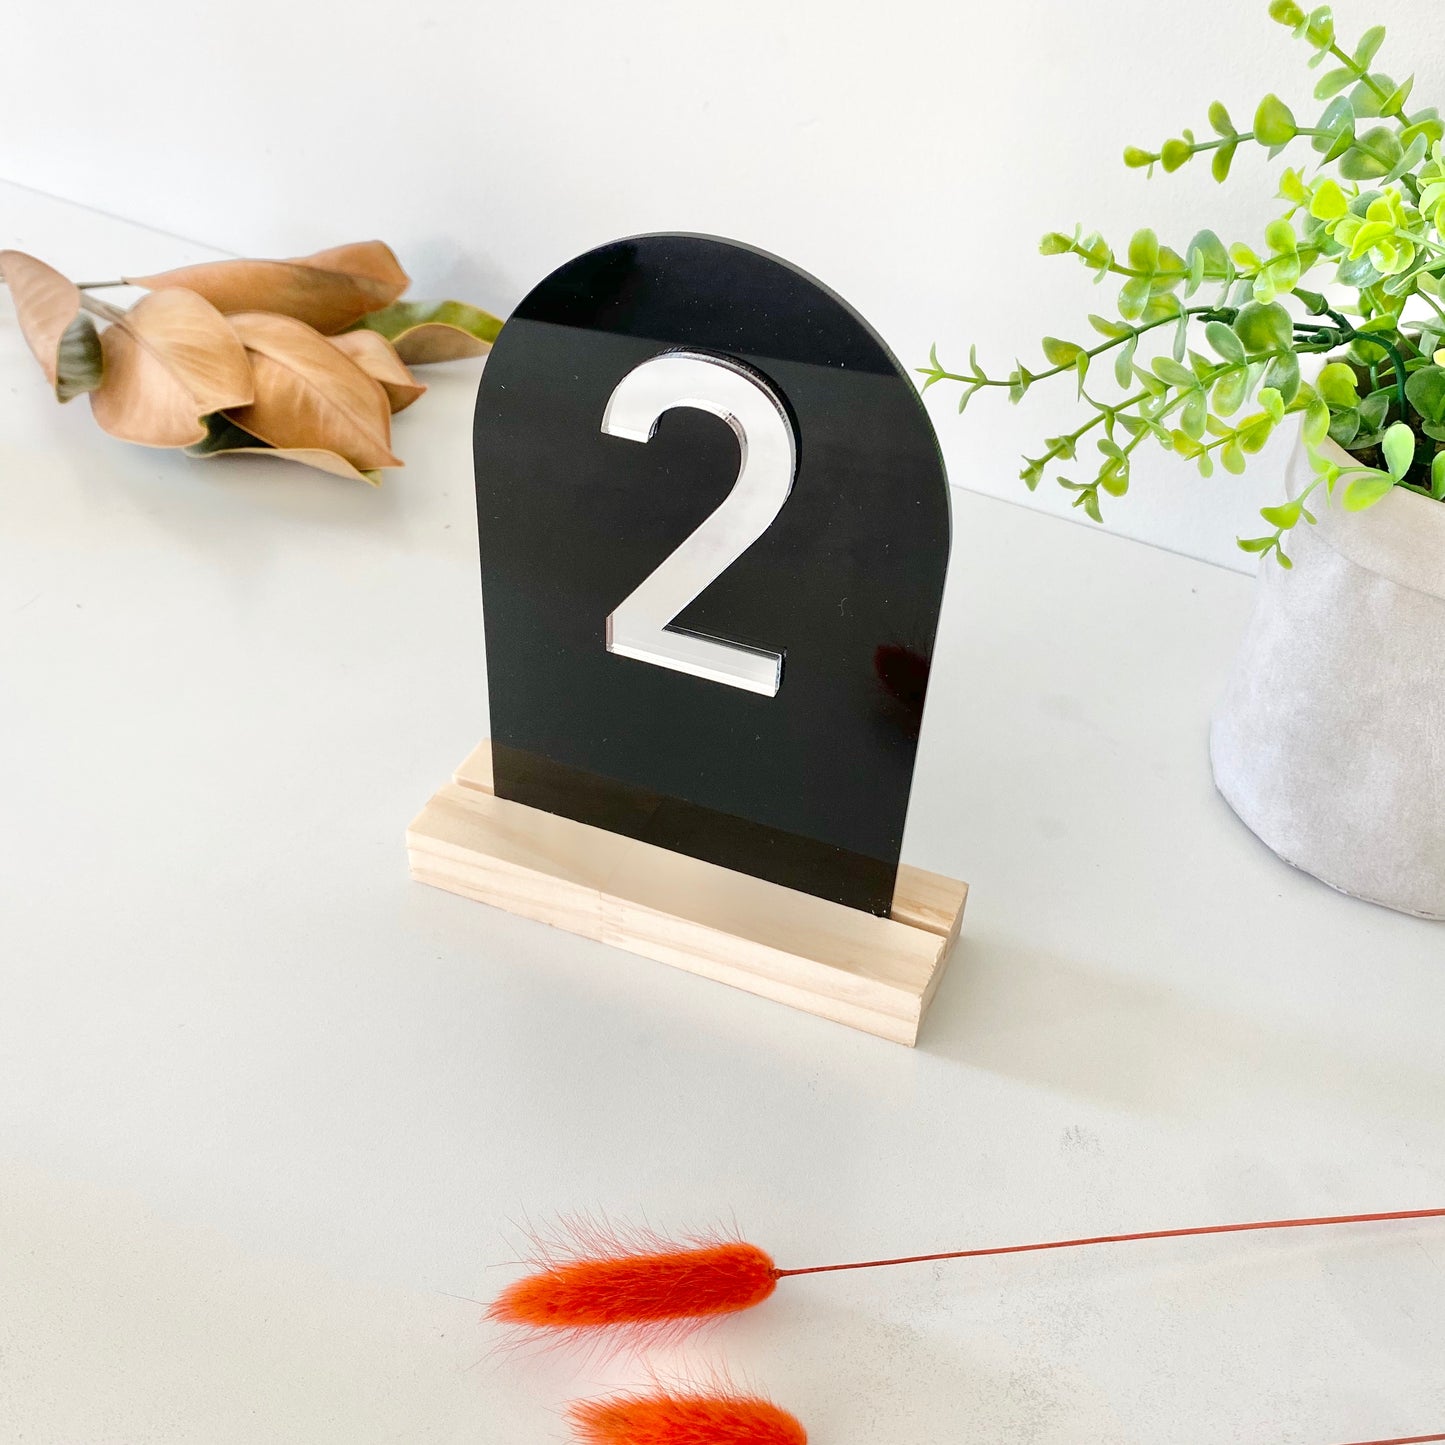 Acrylic Table Numbers - cut out